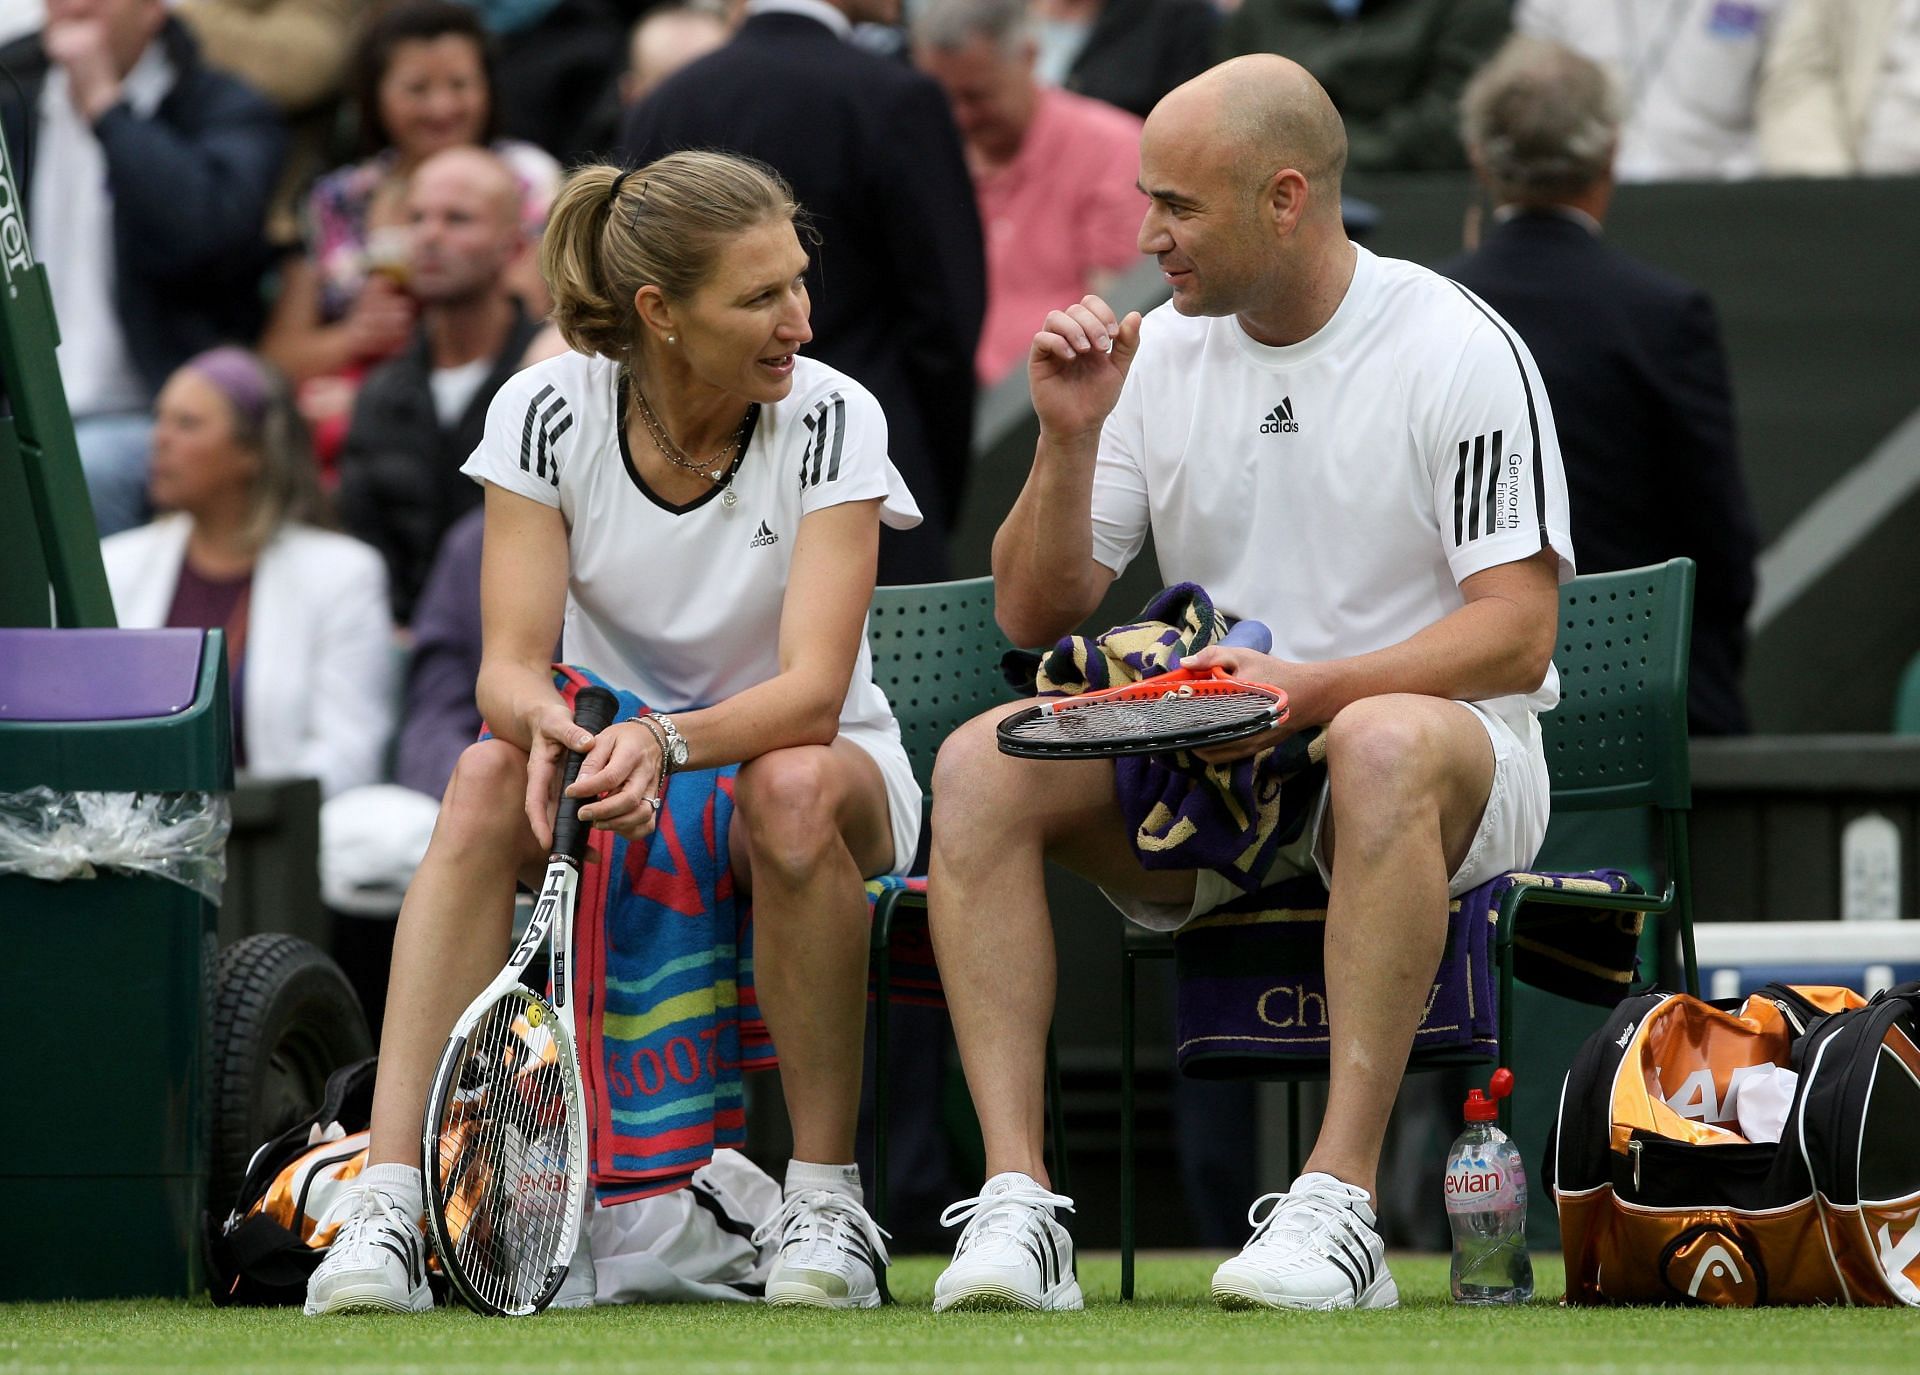 Steffi Graf (L) and Andre Agassi